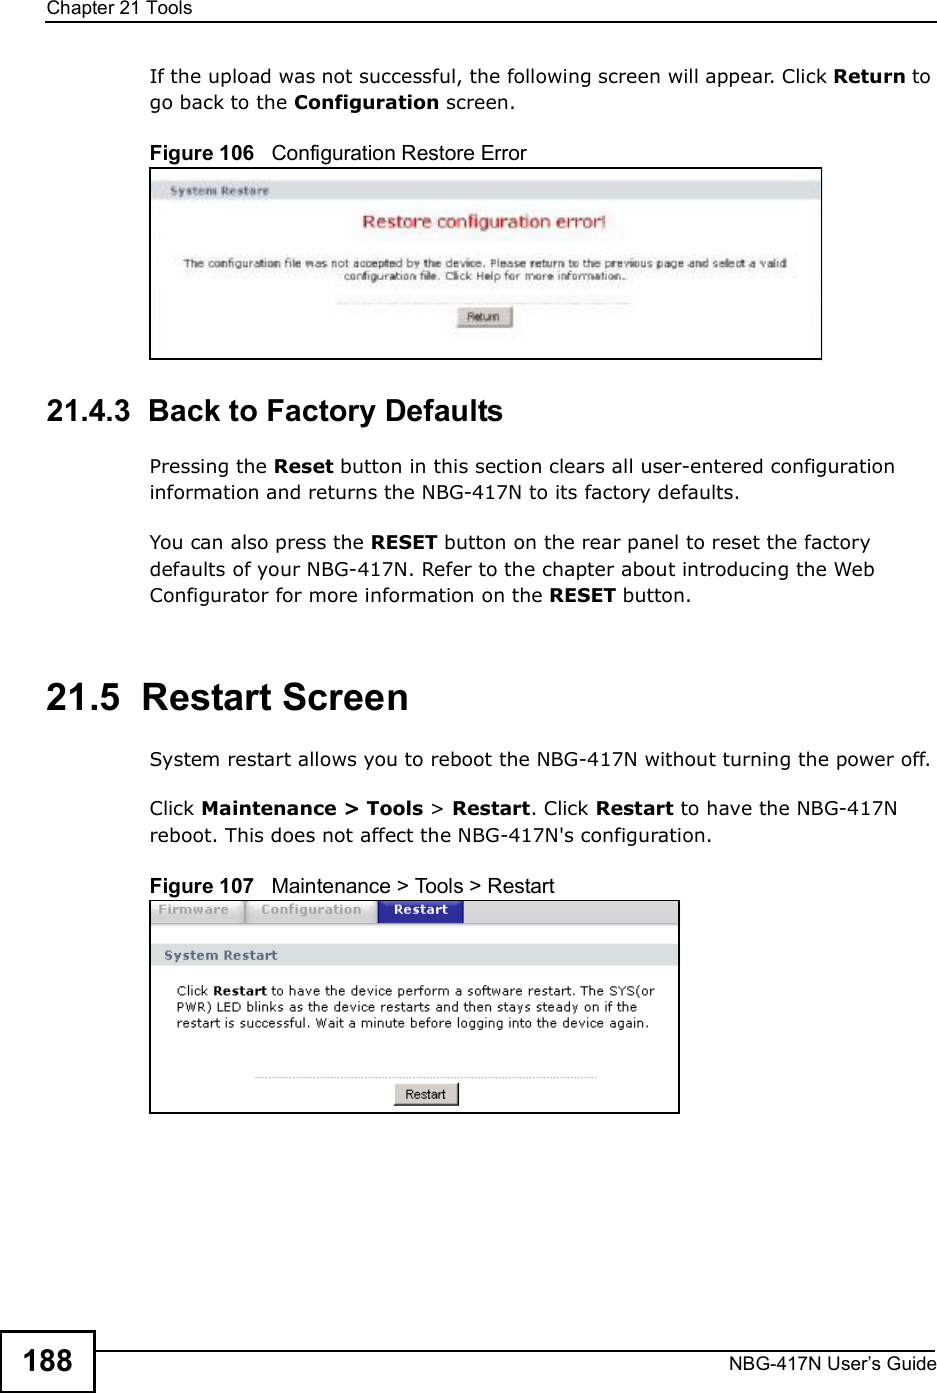 Chapter 21ToolsNBG-417N User s Guide188If the upload was not successful, the following screen will appear. Click Return to go back to the Configuration screen.Figure 106   Configuration Restore Error21.4.3  Back to Factory DefaultsPressing the Reset button in this section clears all user-entered configuration information and returns the NBG-417N to its factory defaults.You can also press the RESET button on the rear panel to reset the factory defaults of your NBG-417N. Refer to the chapter about introducing the Web Configurator for more information on the RESET button.21.5  Restart ScreenSystem restart allows you to reboot the NBG-417N without turning the power off. Click Maintenance &gt; Tools &gt; Restart. Click Restart to have the NBG-417N reboot. This does not affect the NBG-417N&apos;s configuration.Figure 107   Maintenance &gt; Tools &gt; Restart 